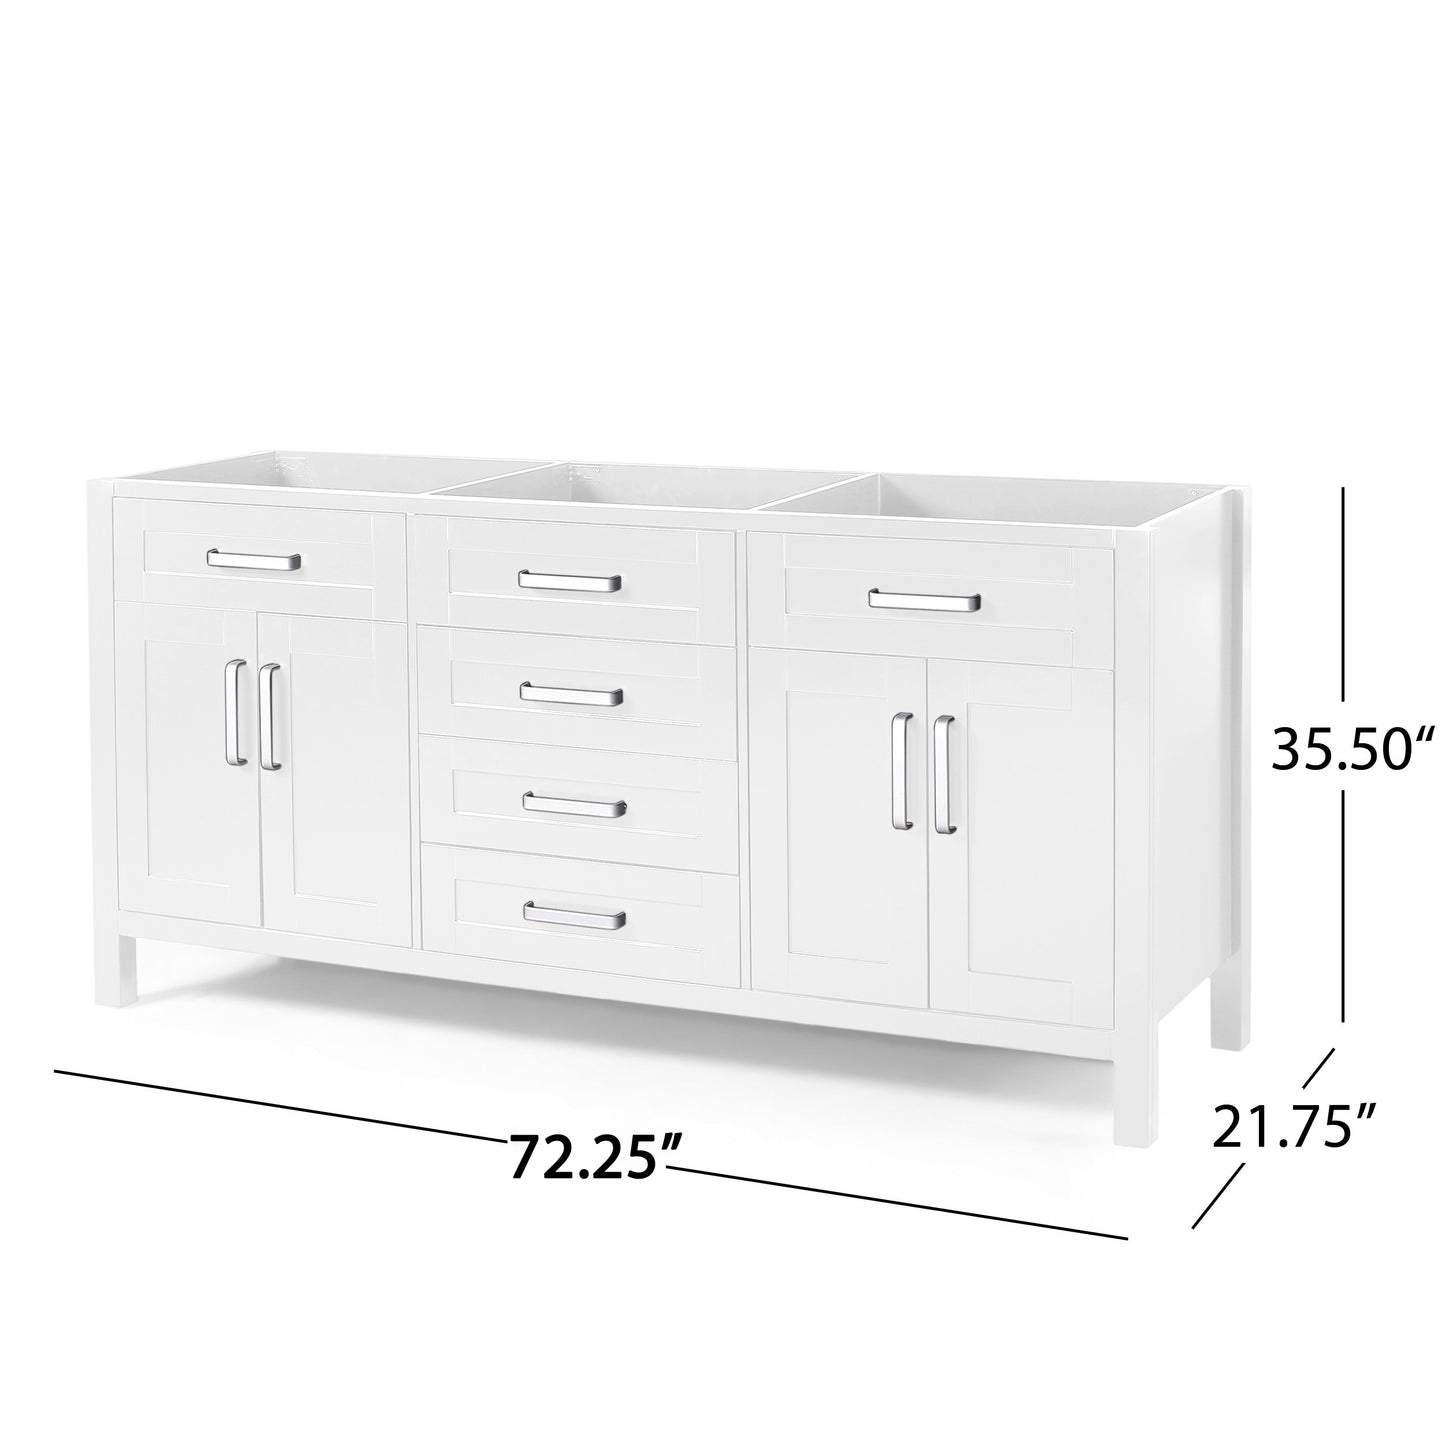 Greeley Contemporary 72" Wood Bathroom Vanity (Counter Top Not Included)